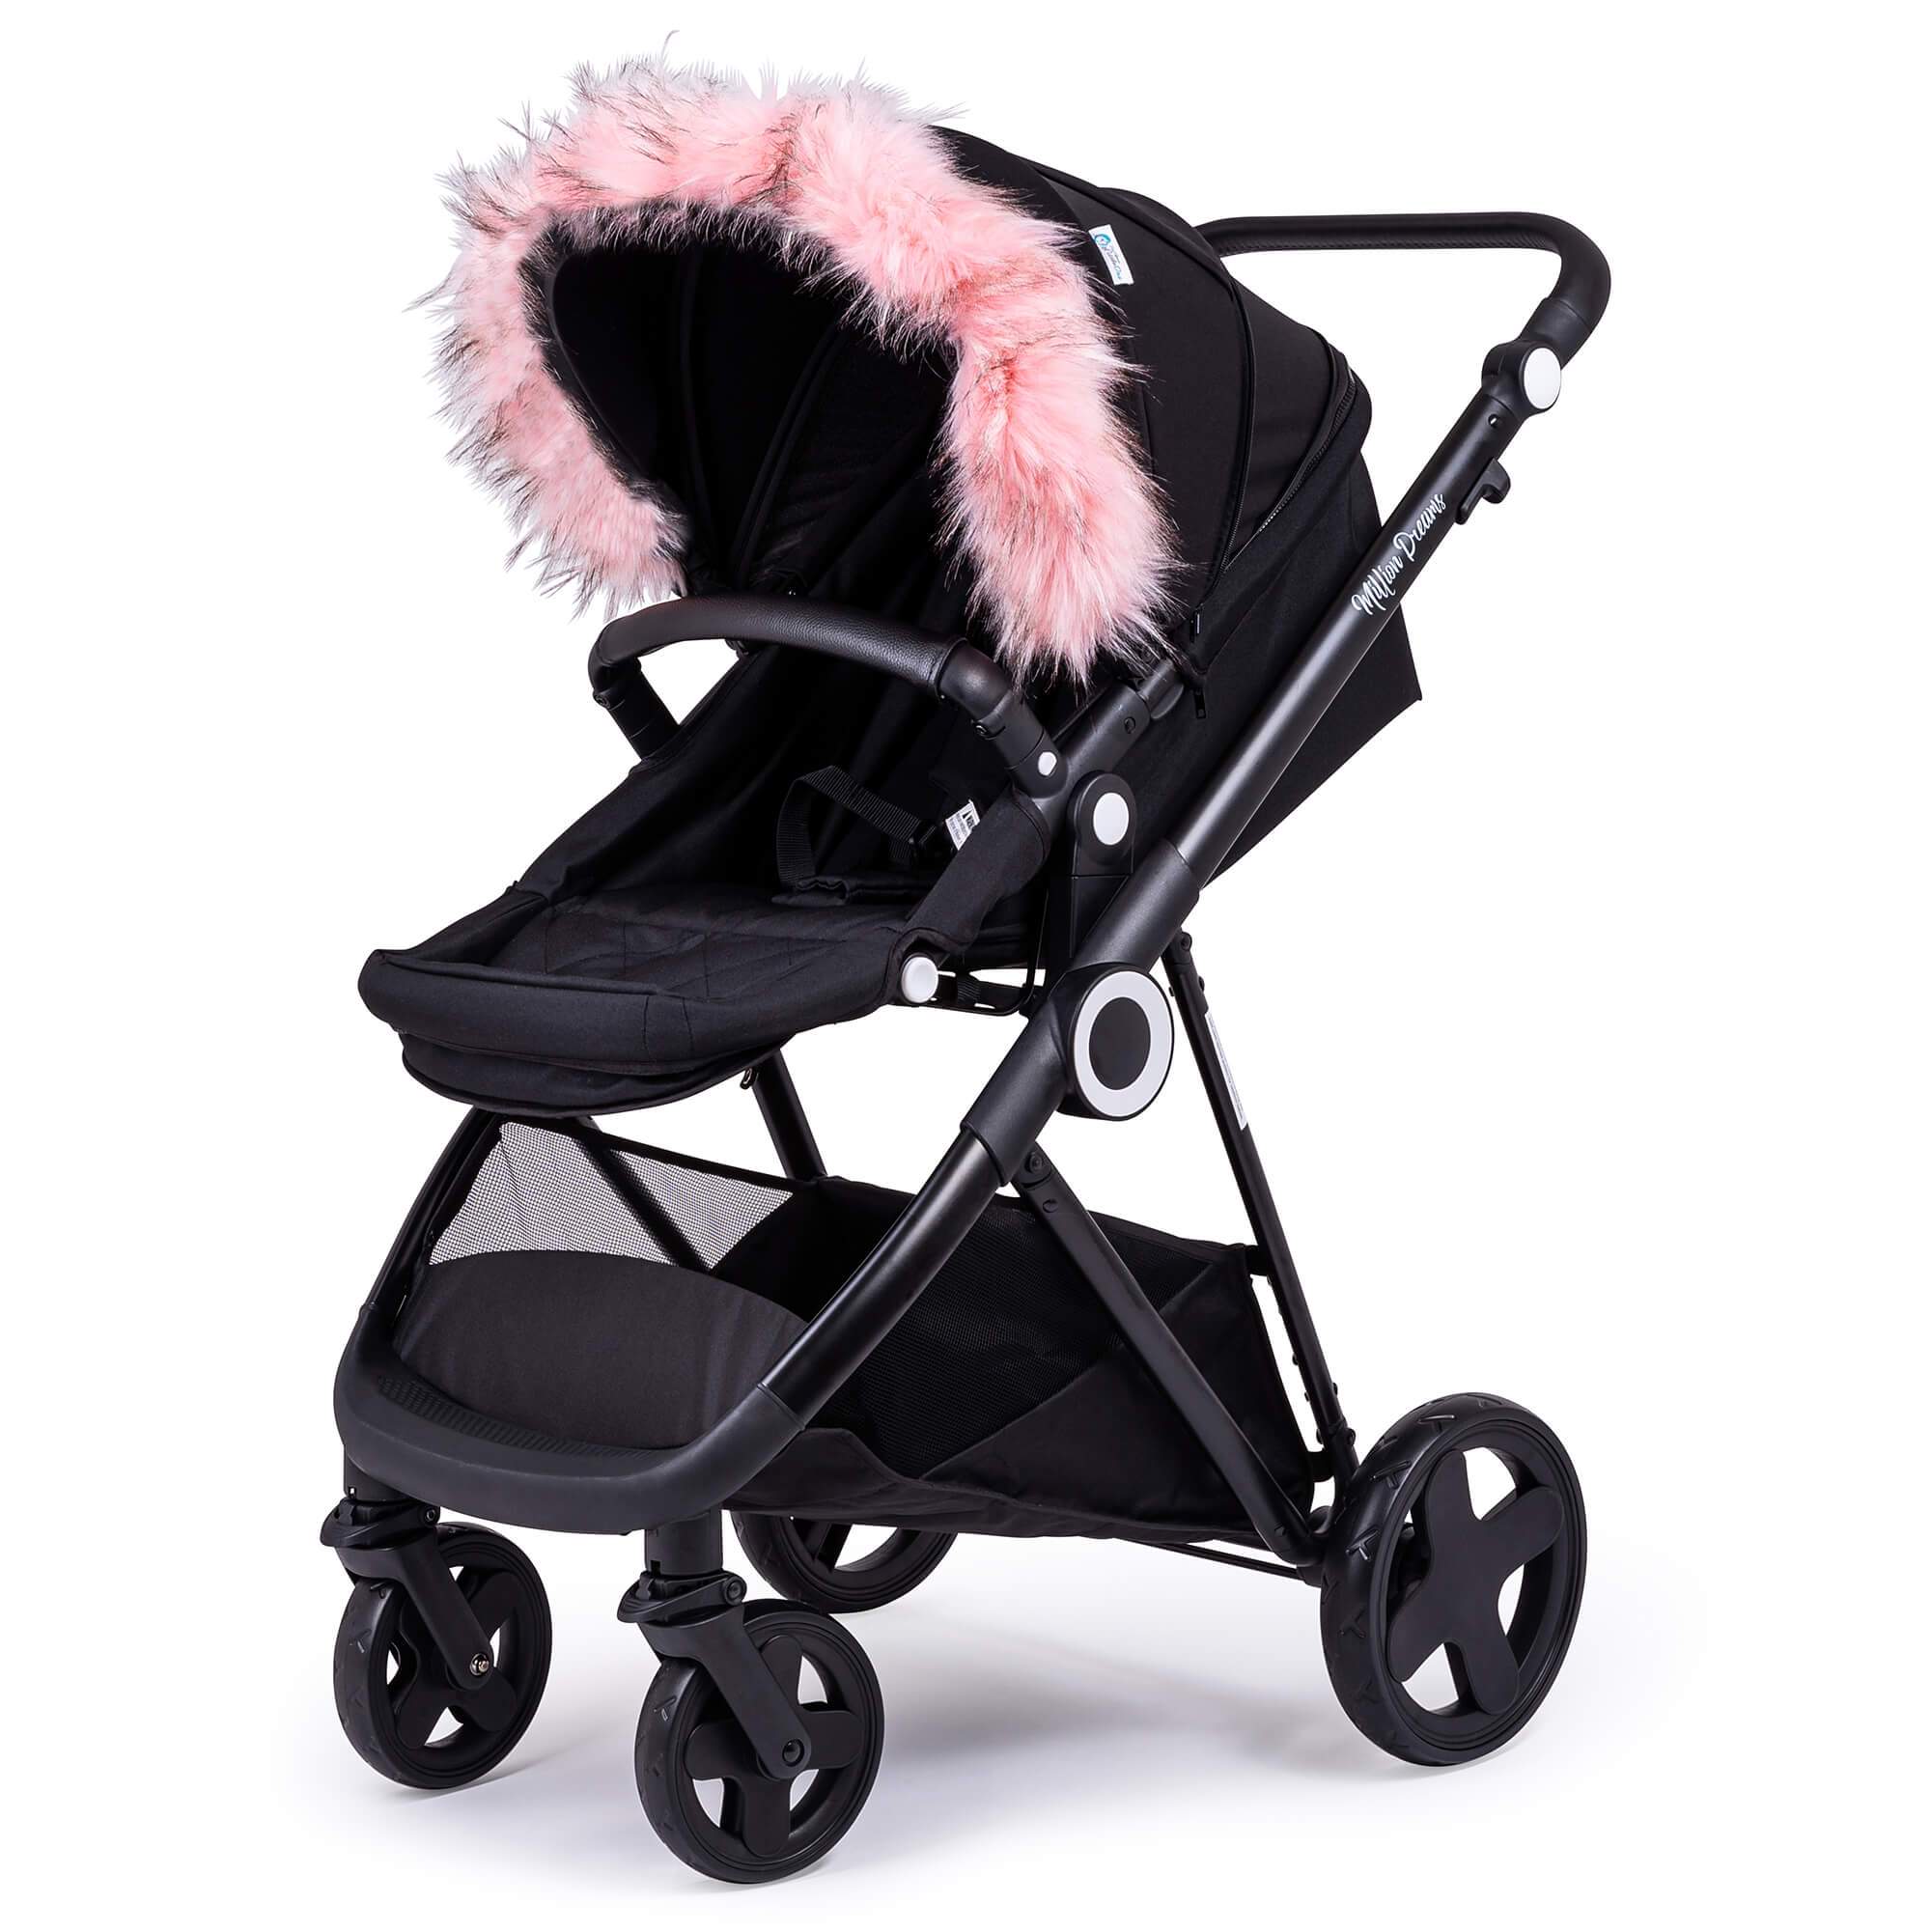 Pram Fur Hood Trim Attachment For Pushchair Compatible with Unilove - Light Pink / Fits All Models | For Your Little One